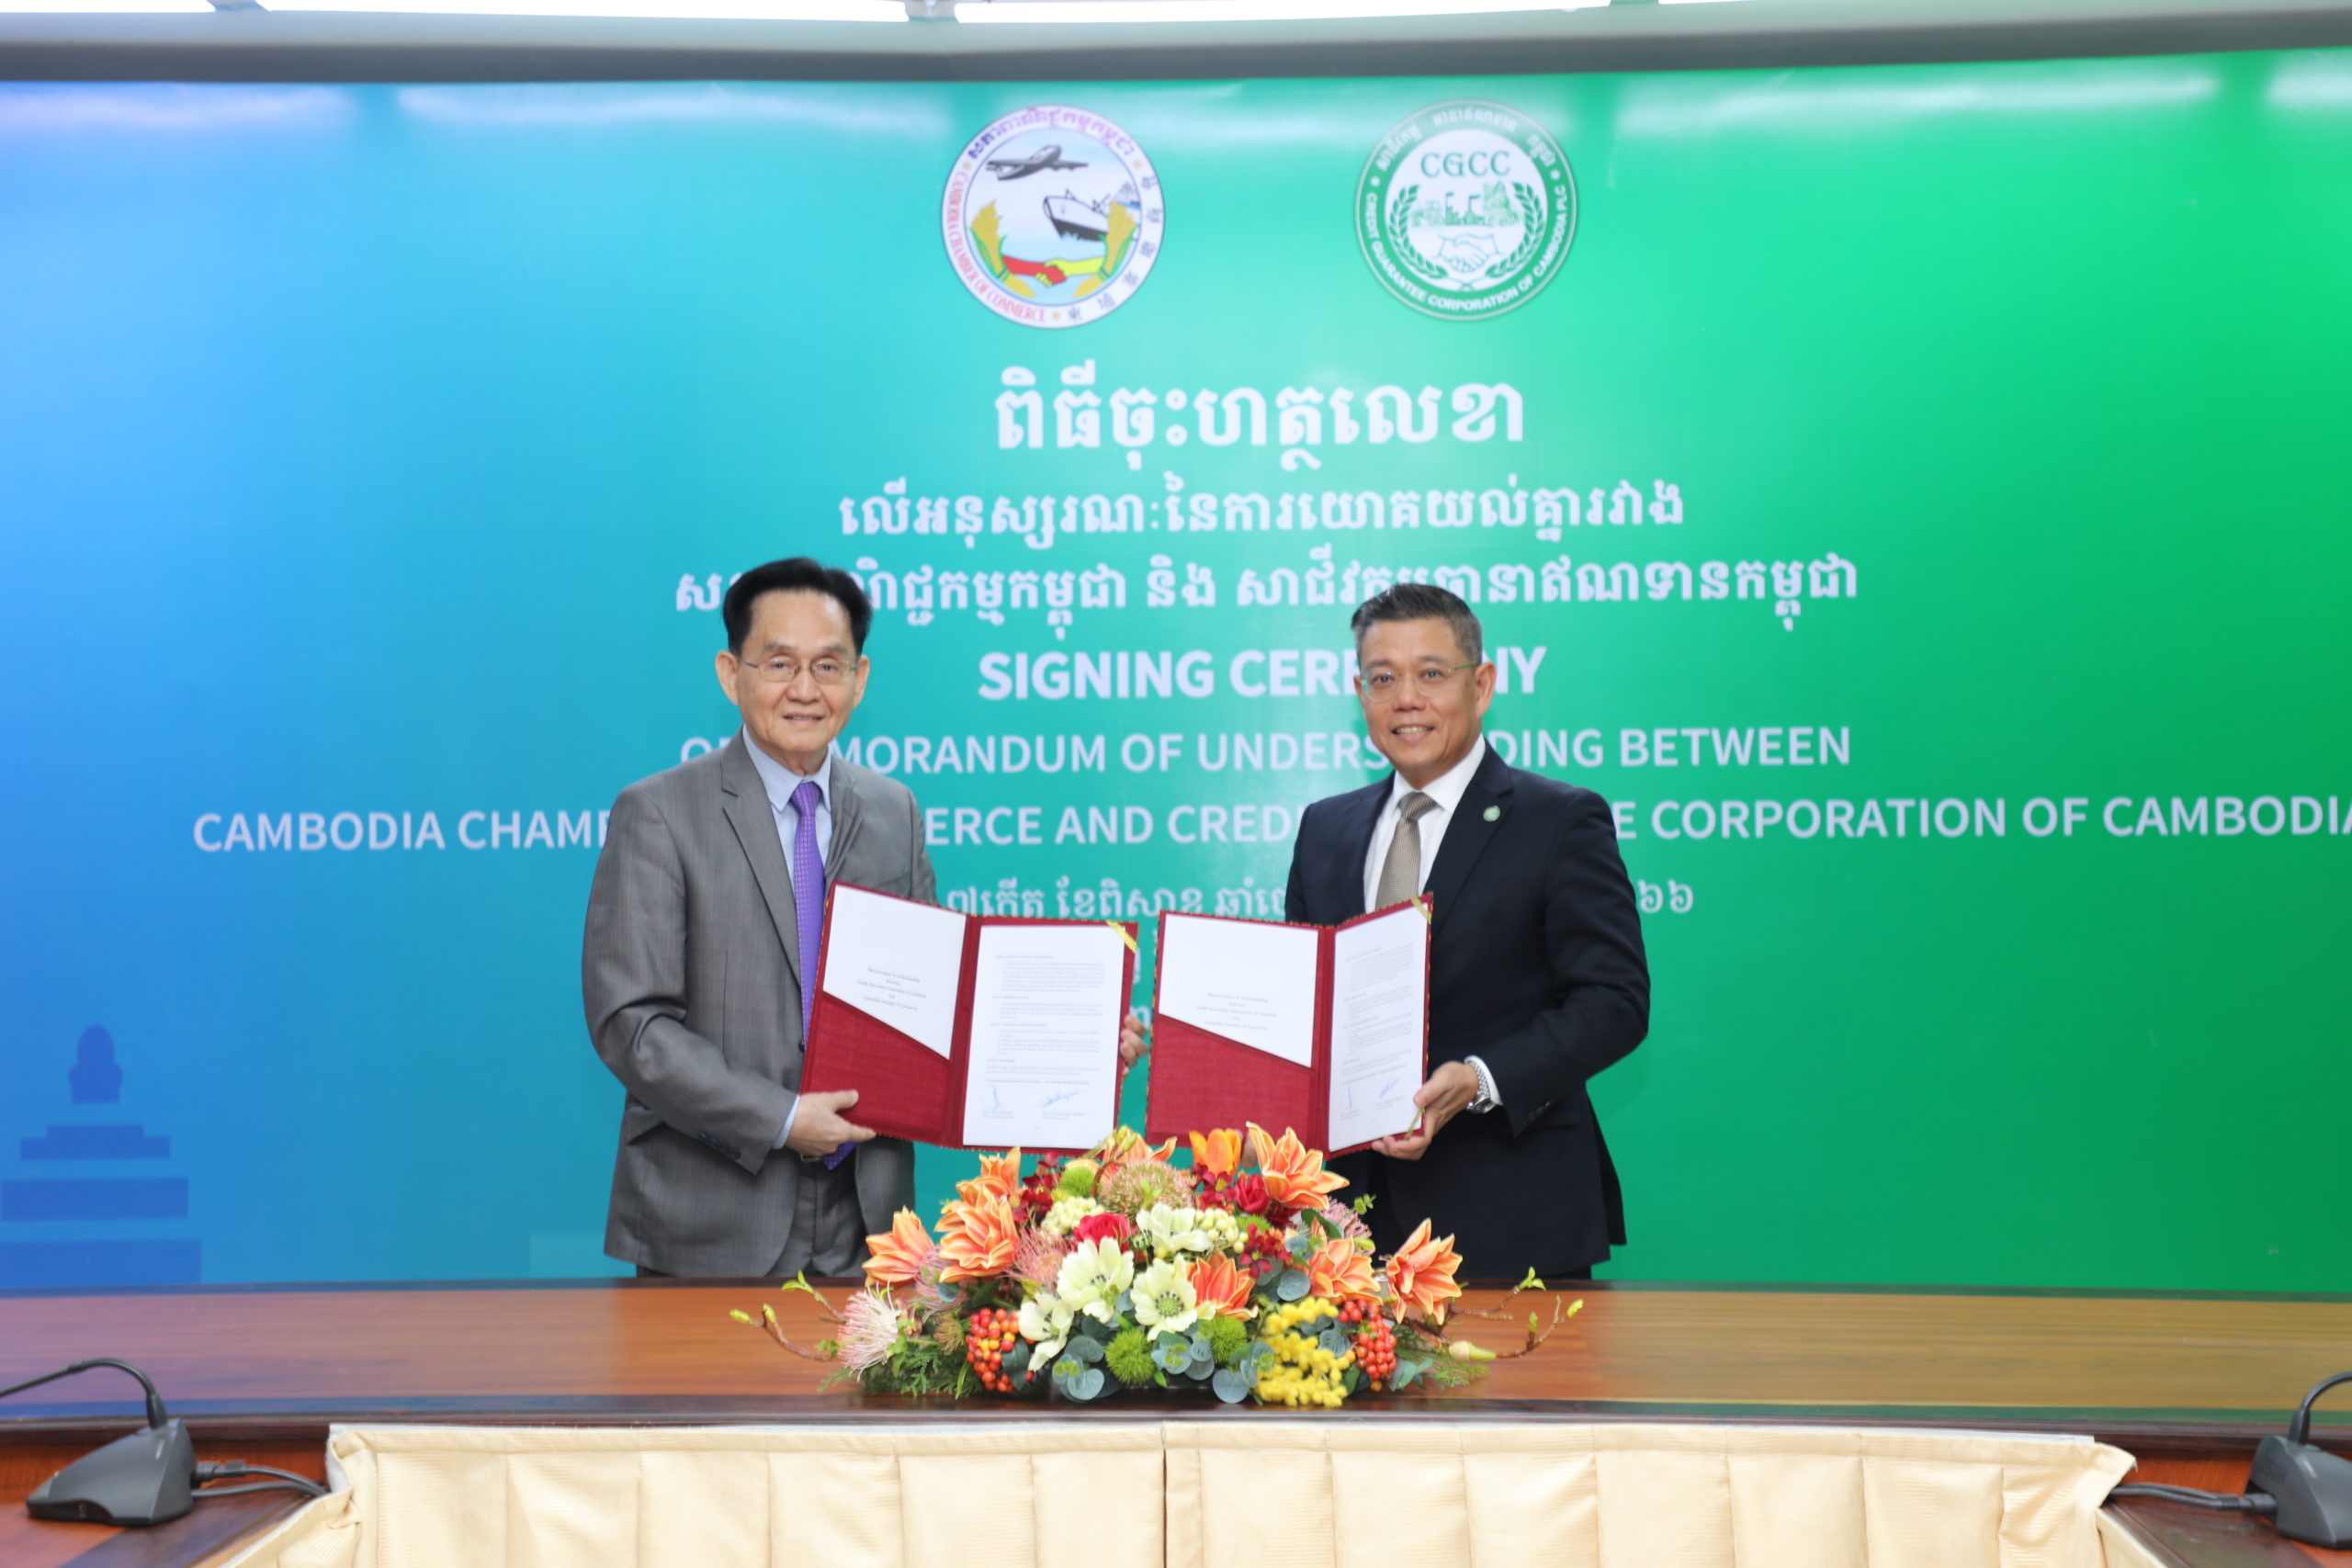 Signing Ceremony on the Memorandum of Understanding (MoU) Between Credit Guarantee Corporation of Cambodia (CGCC) and Cambodia Chamber of Commerce (CCC)